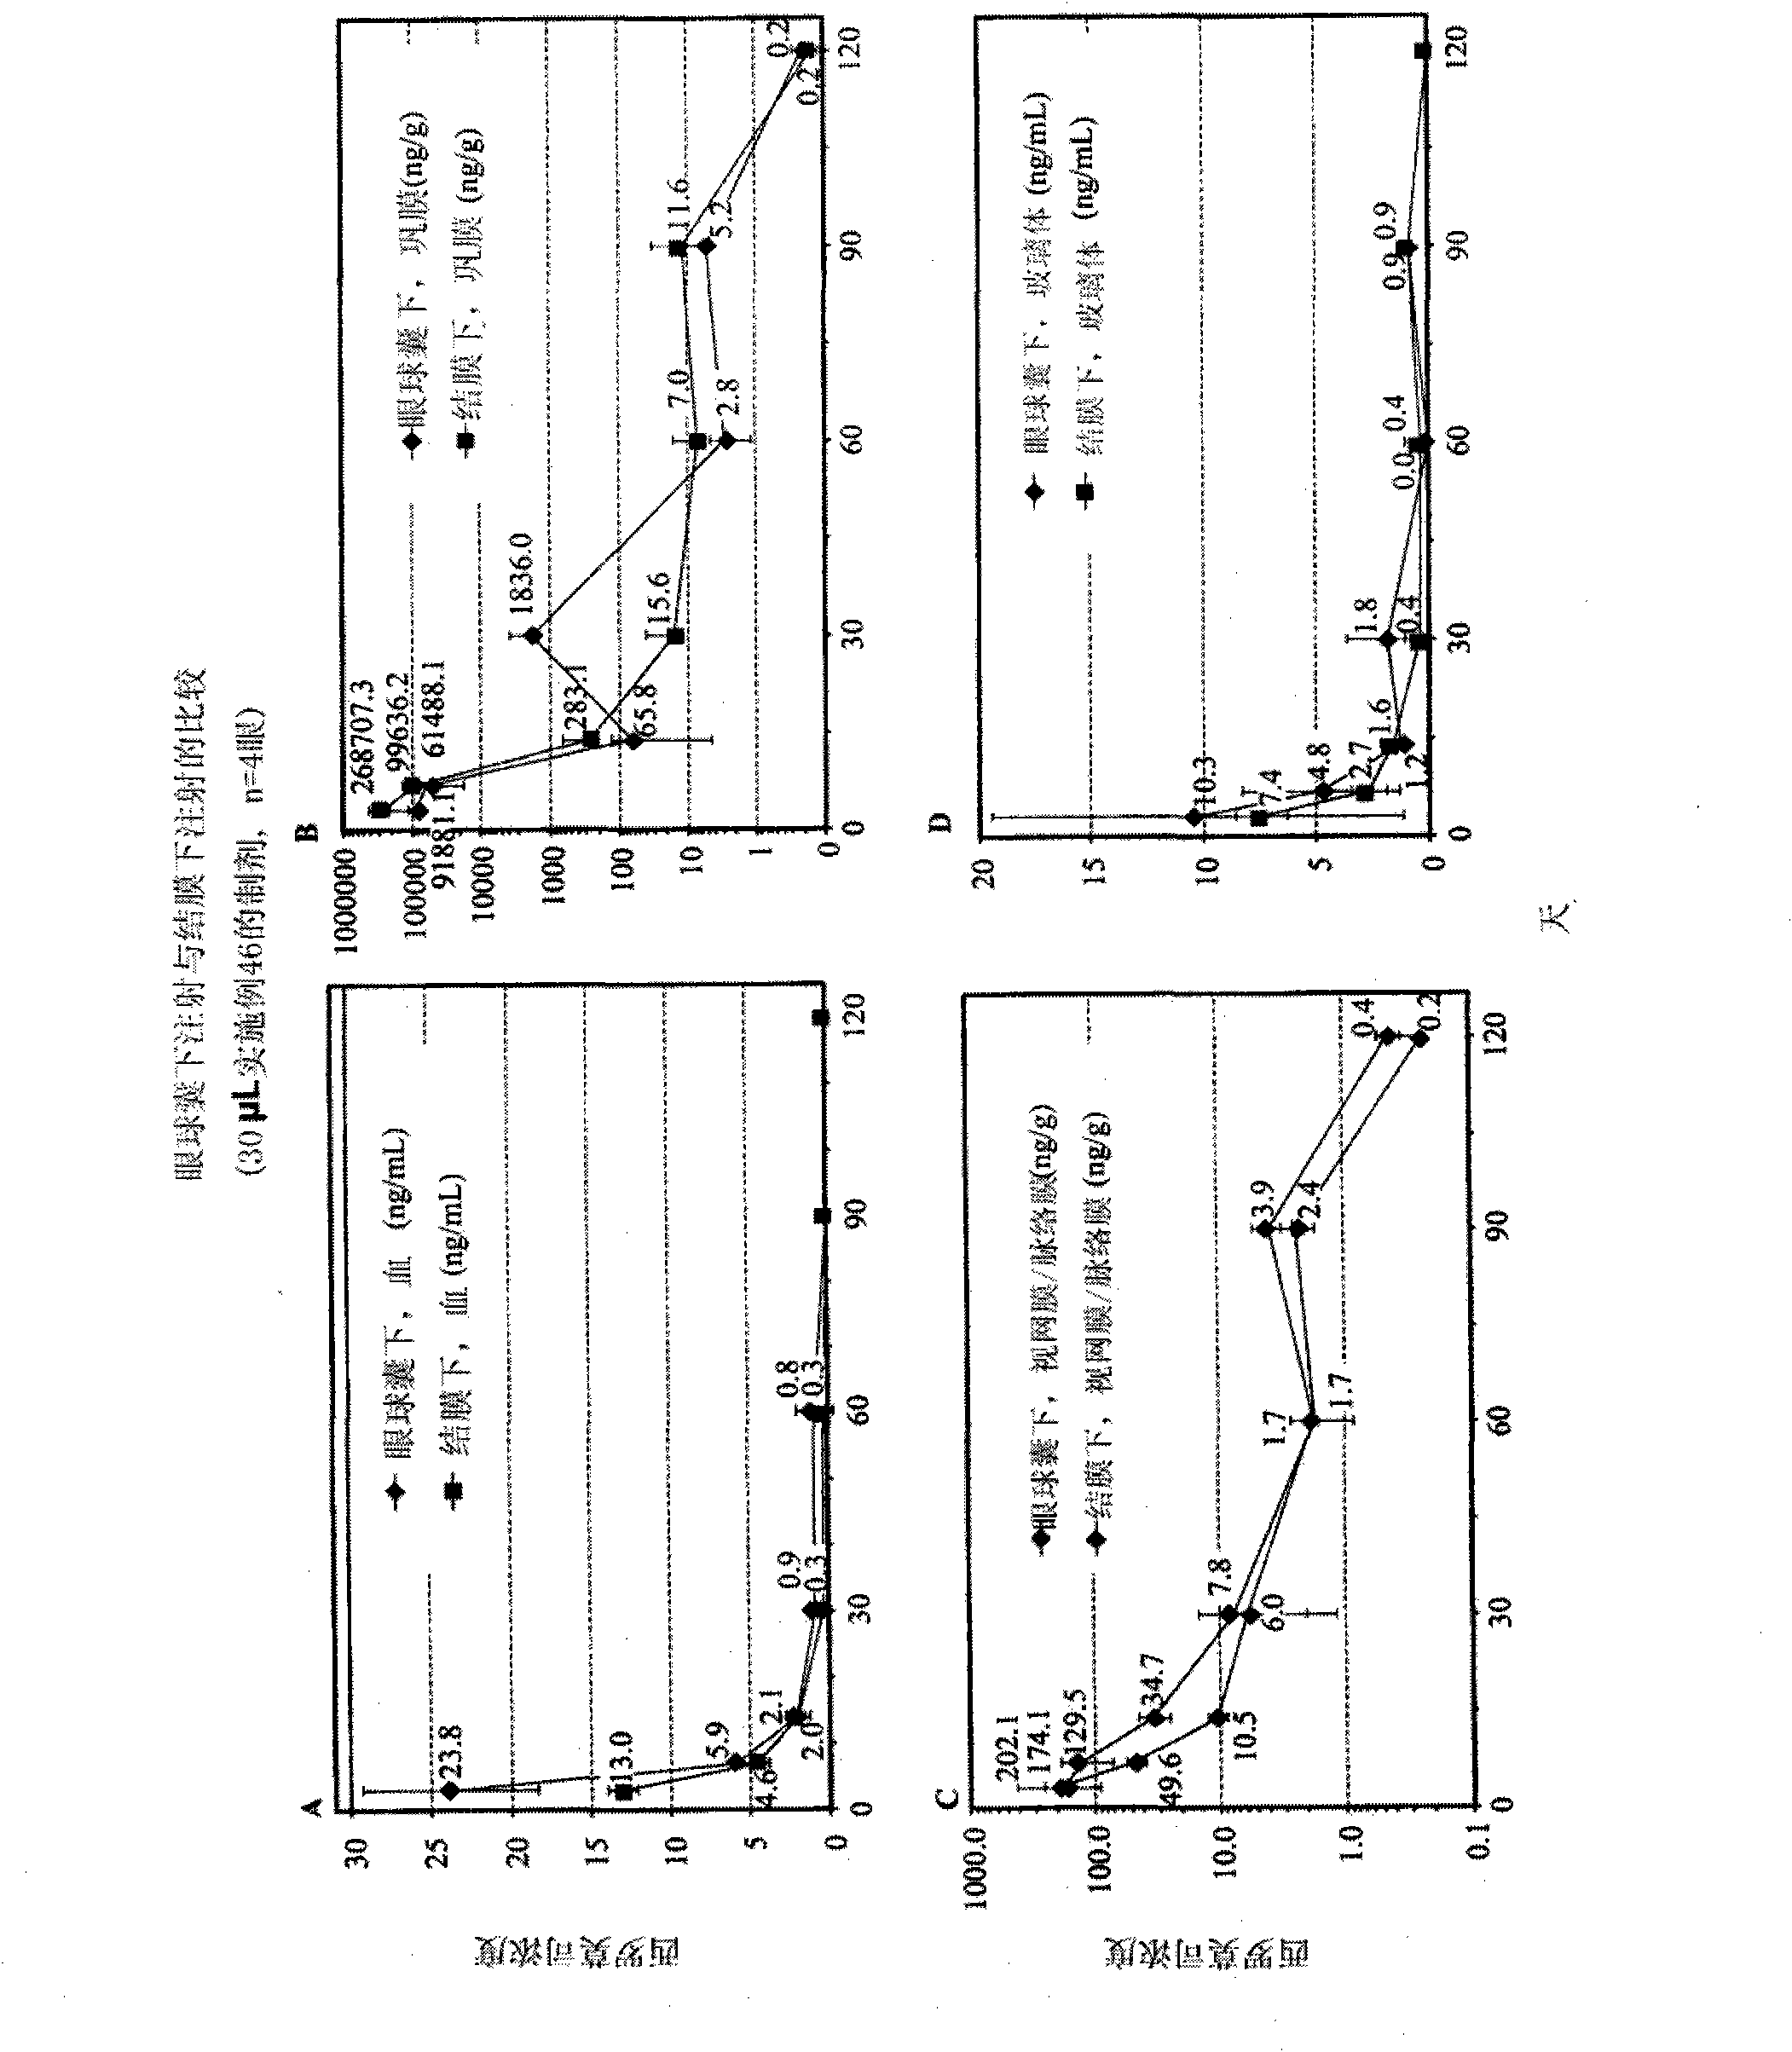 Formulations for treatment of ocular diseases or conditions